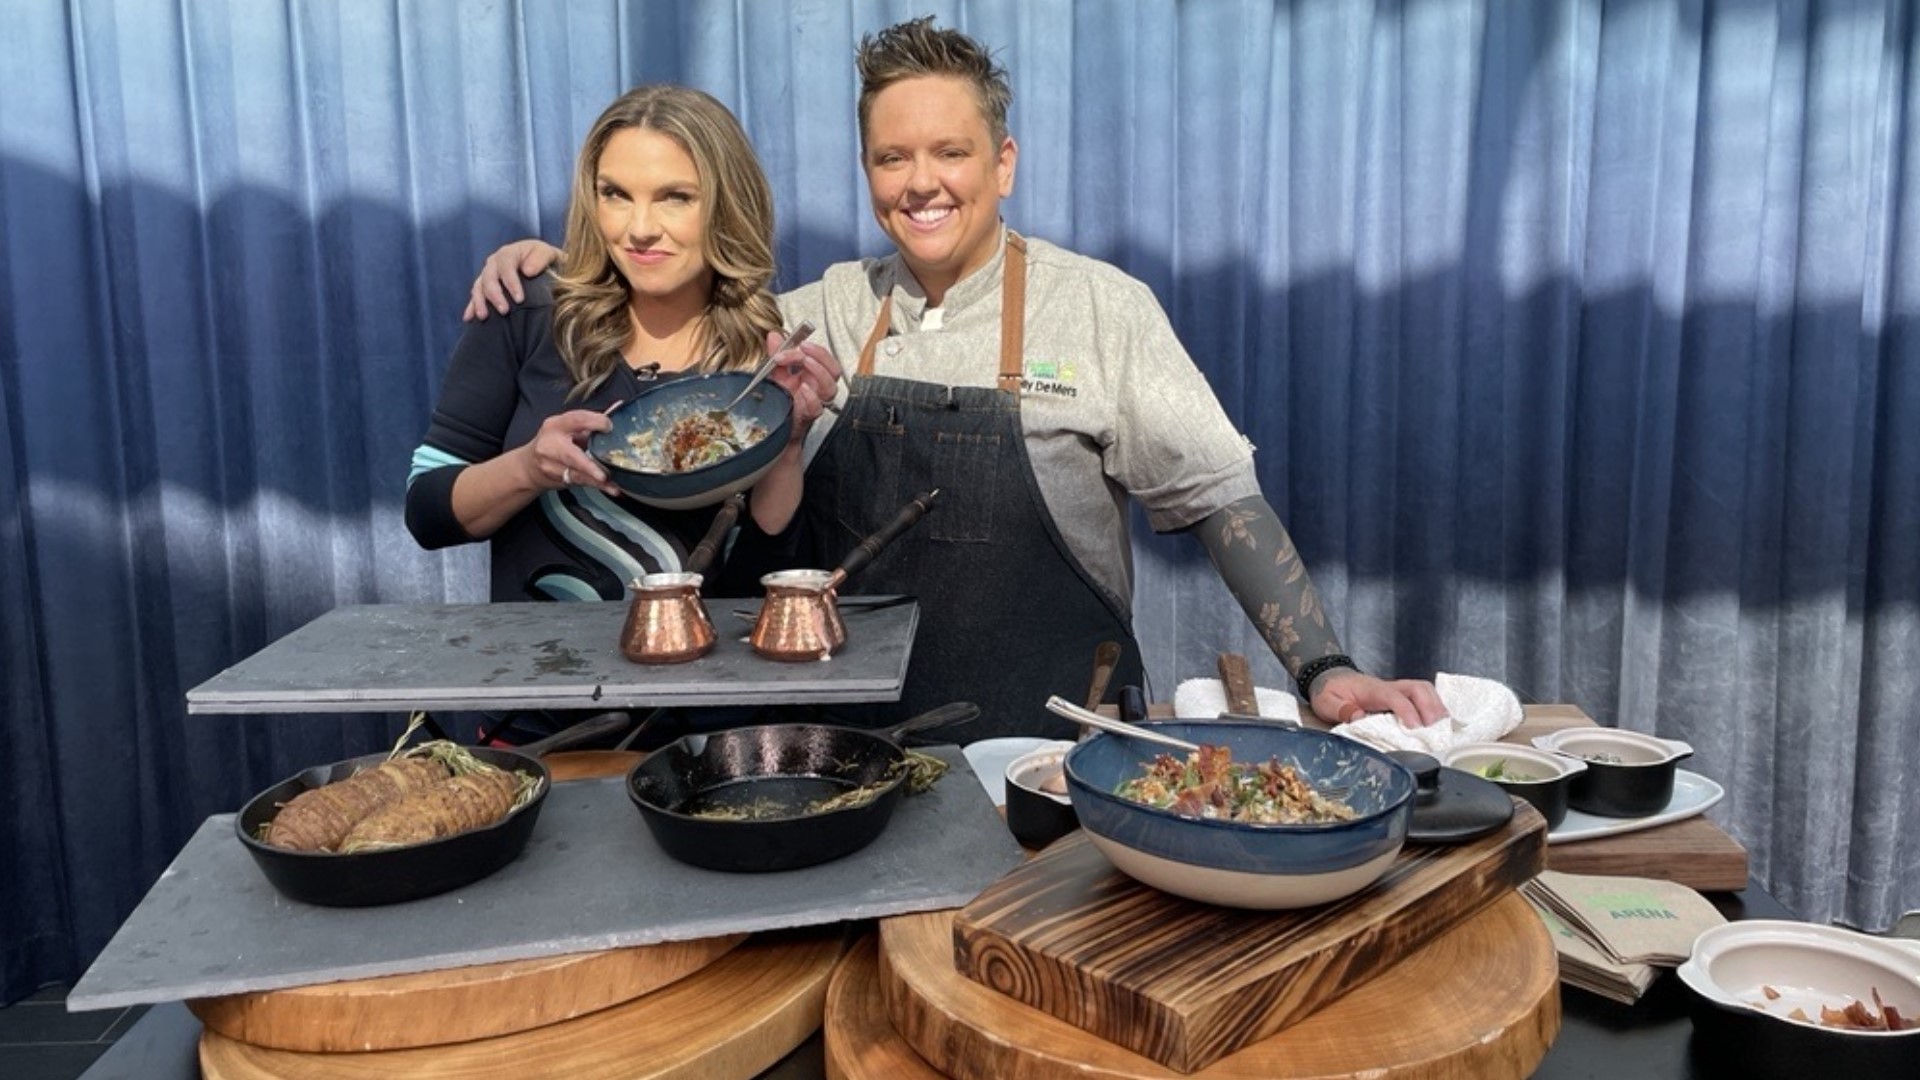 Climate Pledge Arena Executive Chef Molly De Mers shows us how to make a roasted hasselback potato topped with Beecher's cheese and bacon pop rocks! #newdaynw